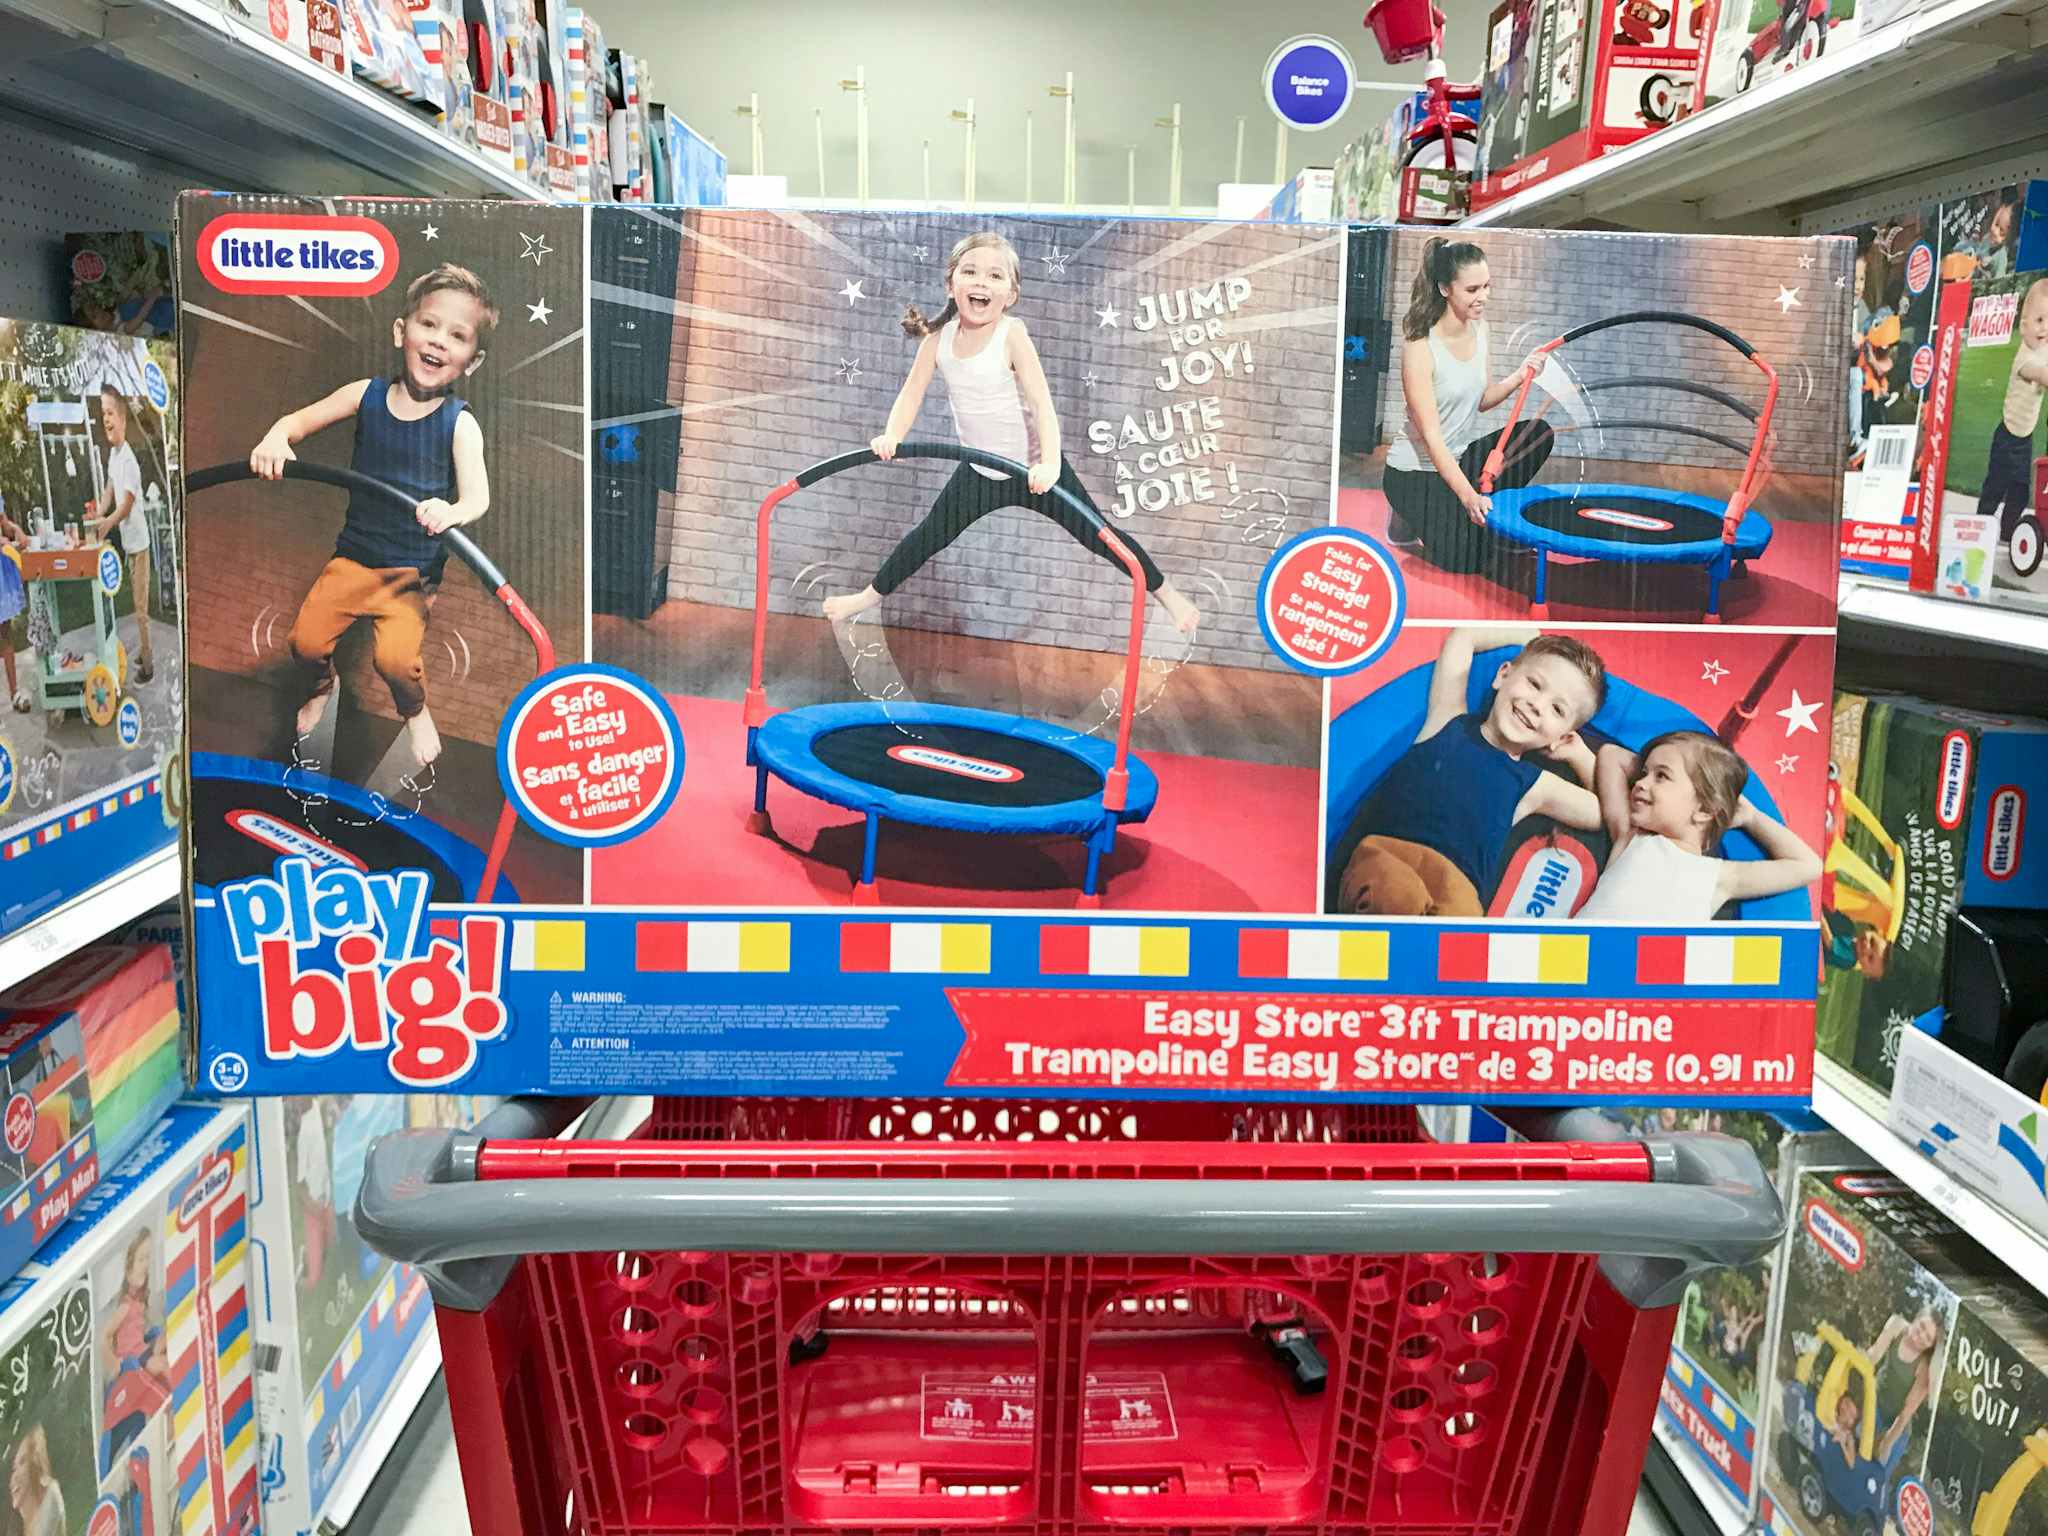 The box for a Little Tikes Easy Store 3ft Trampoline with a handle sitting on top of a Target shopping cart.